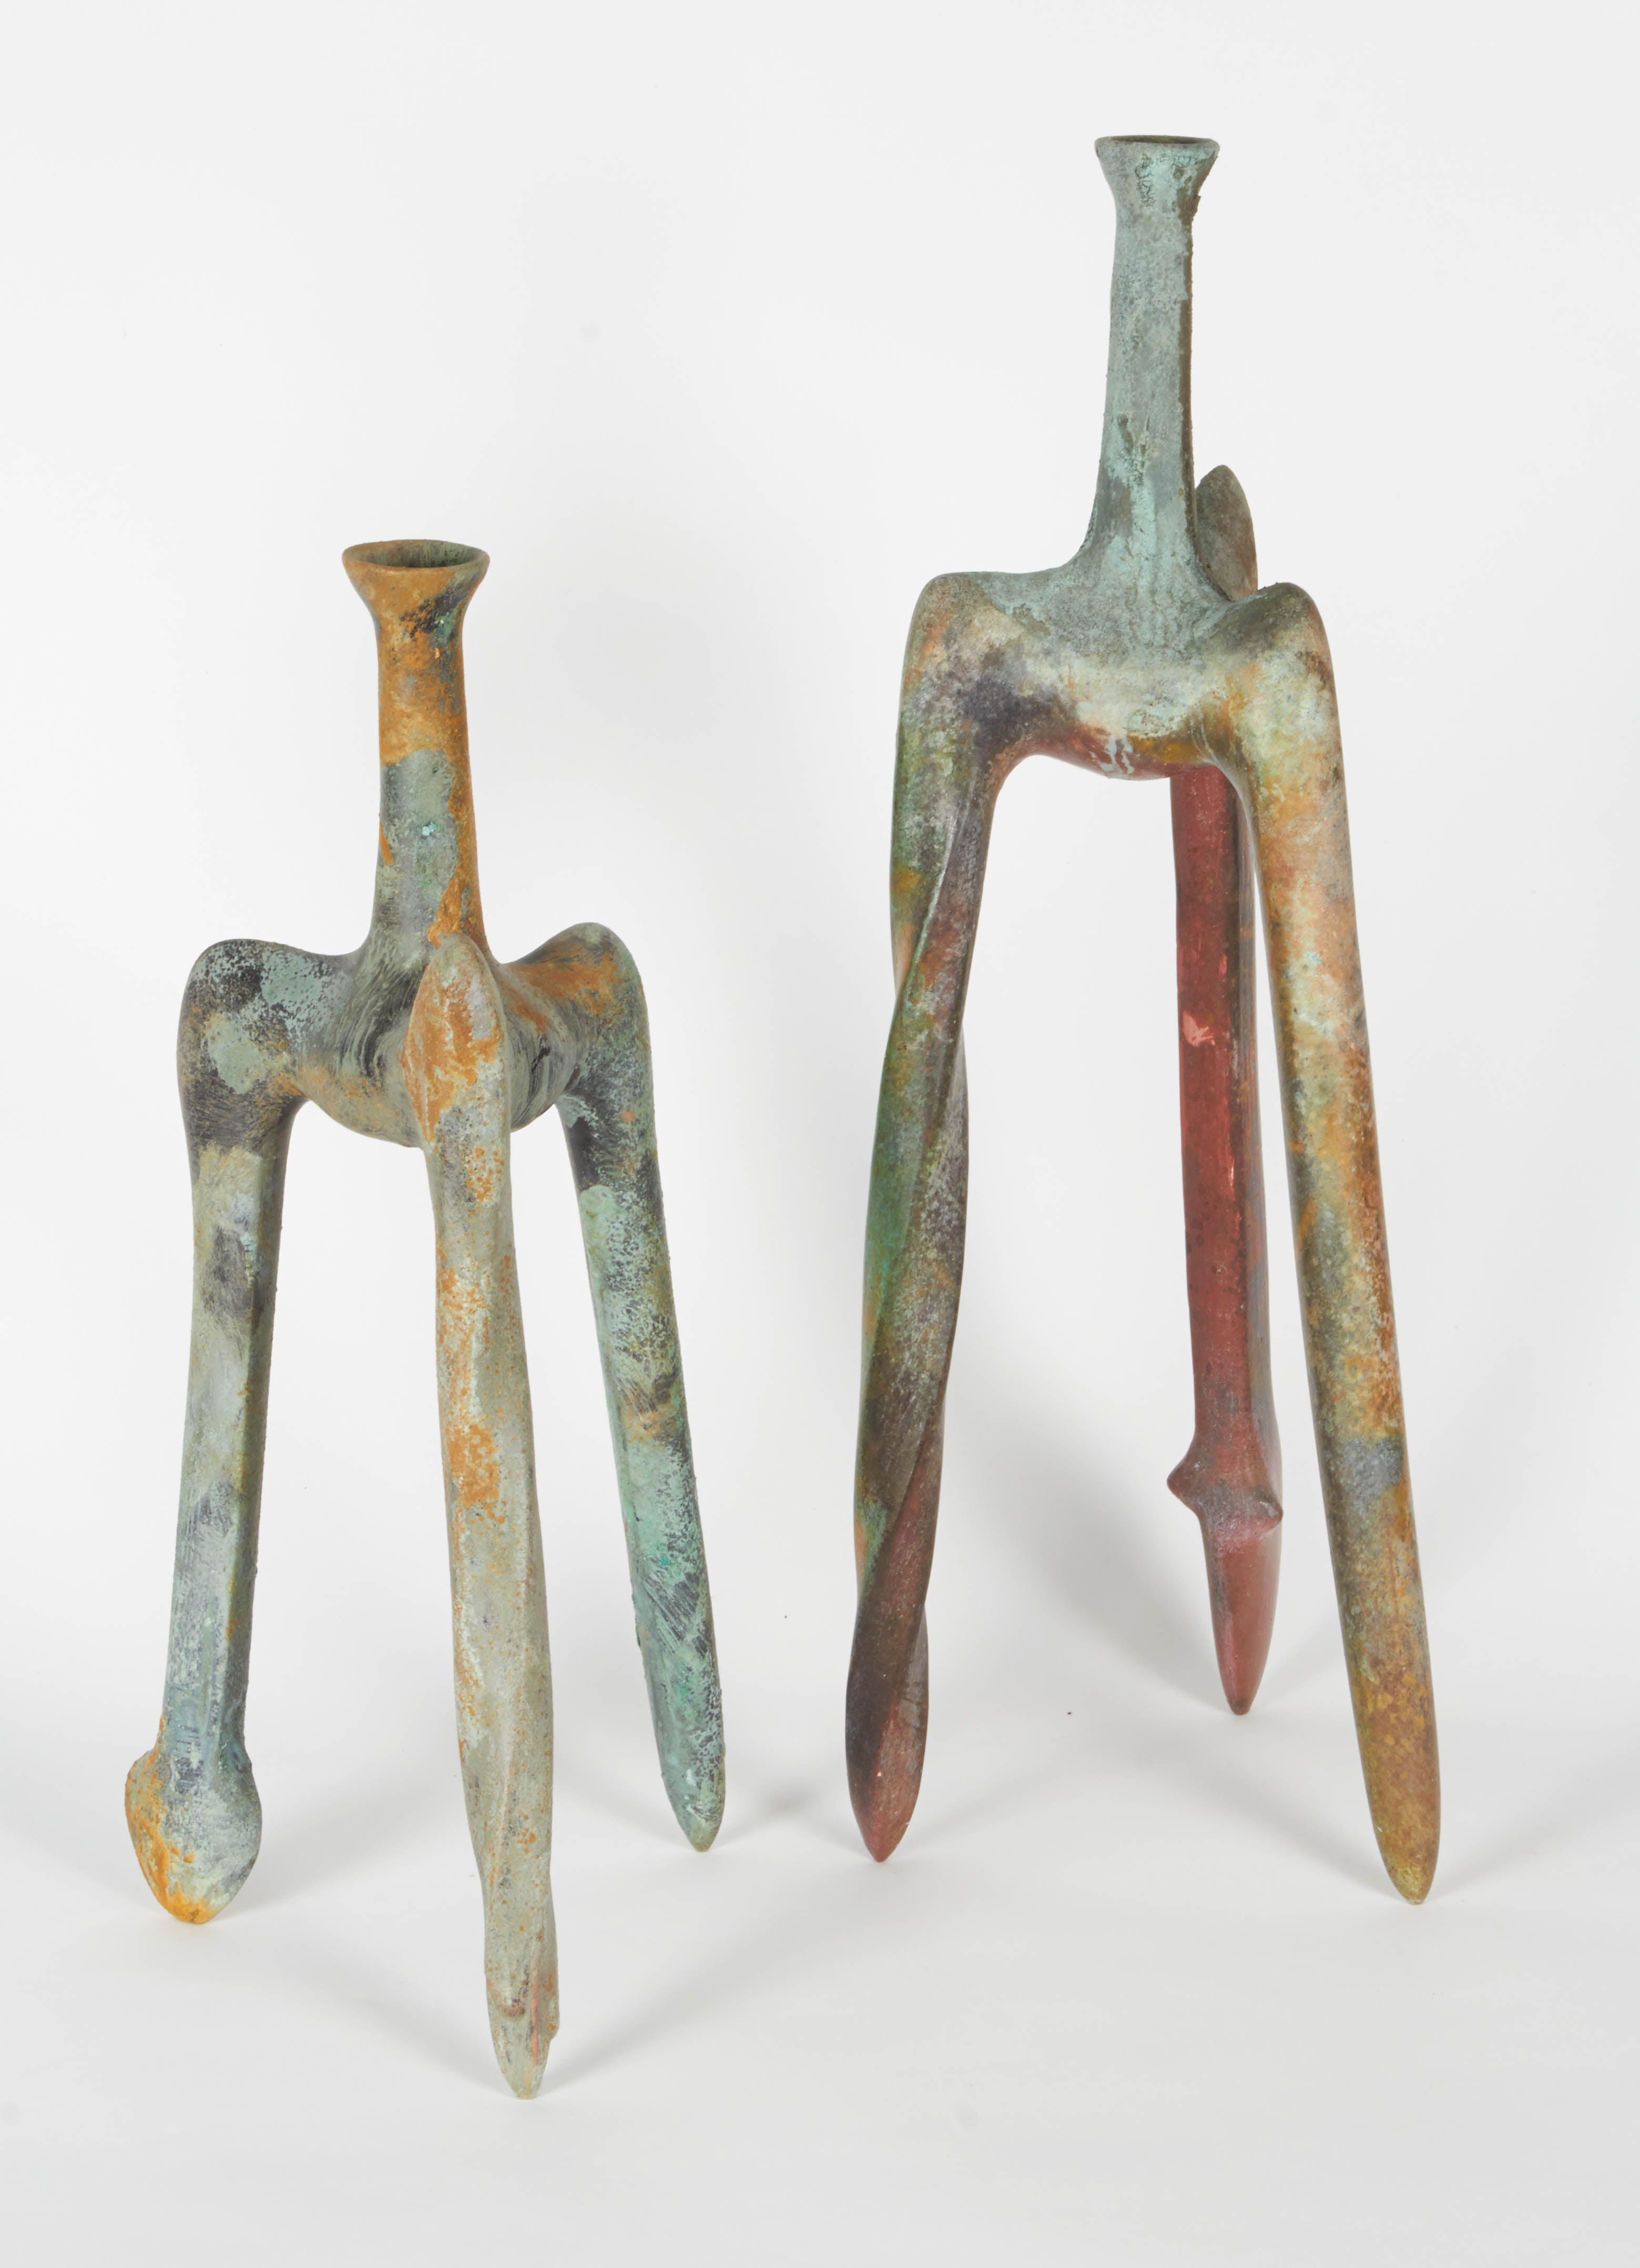 American Richard Hirsch Ceramic Vessel and Stand, Tripod Vessels Collection, 1987 - 1994 For Sale